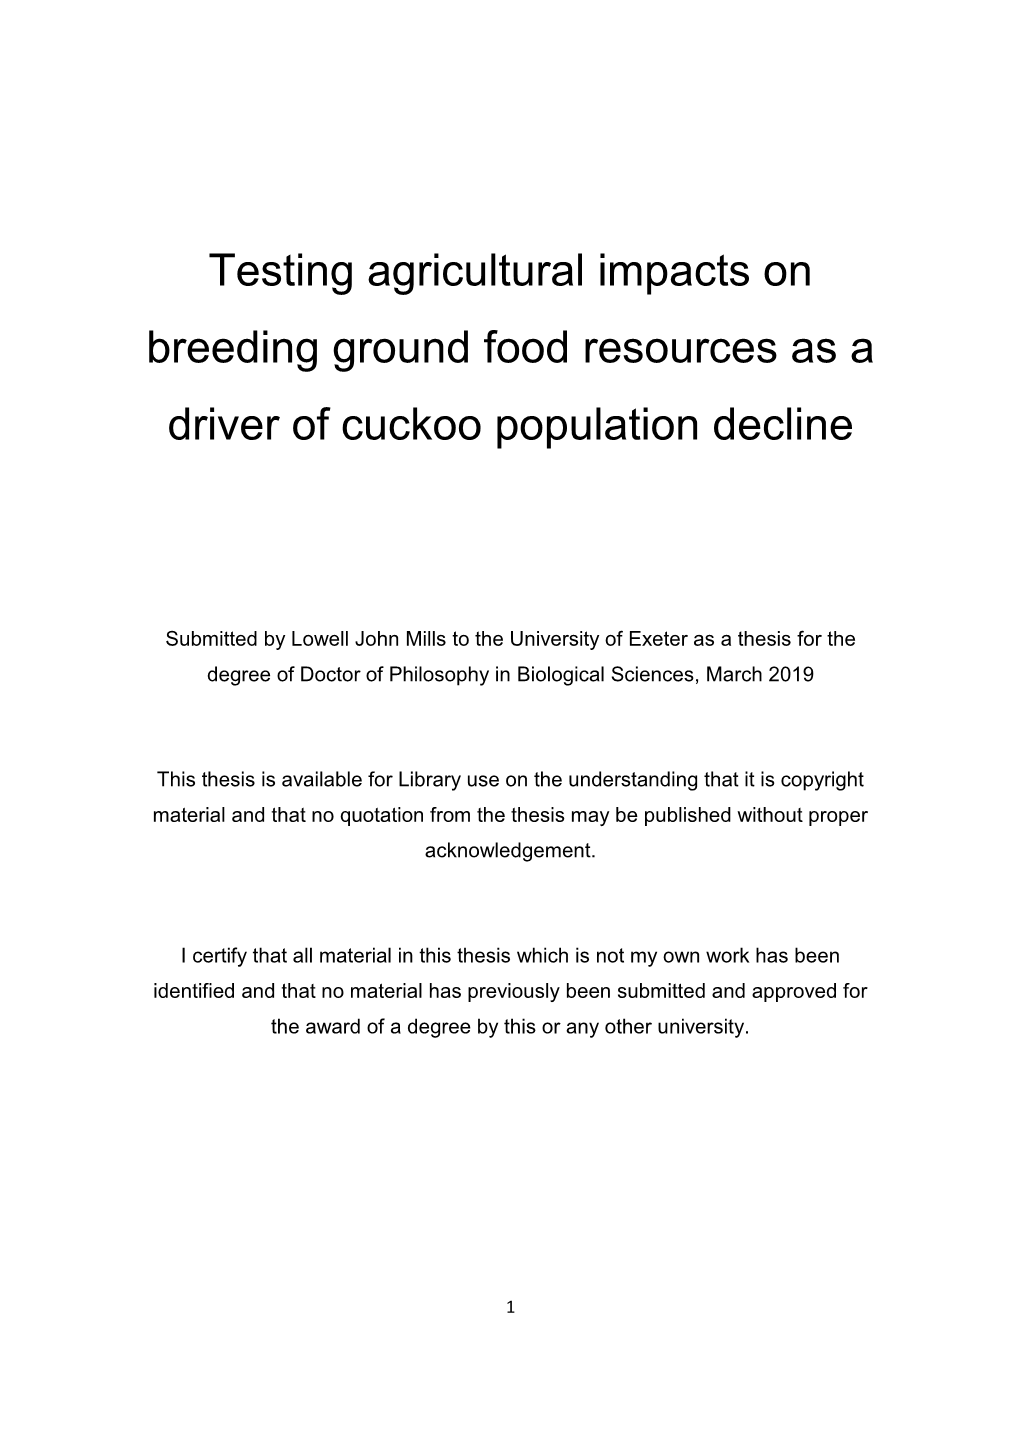 Testing Agricultural Impacts on Breeding Ground Food Resources As a Driver of Cuckoo Population Decline